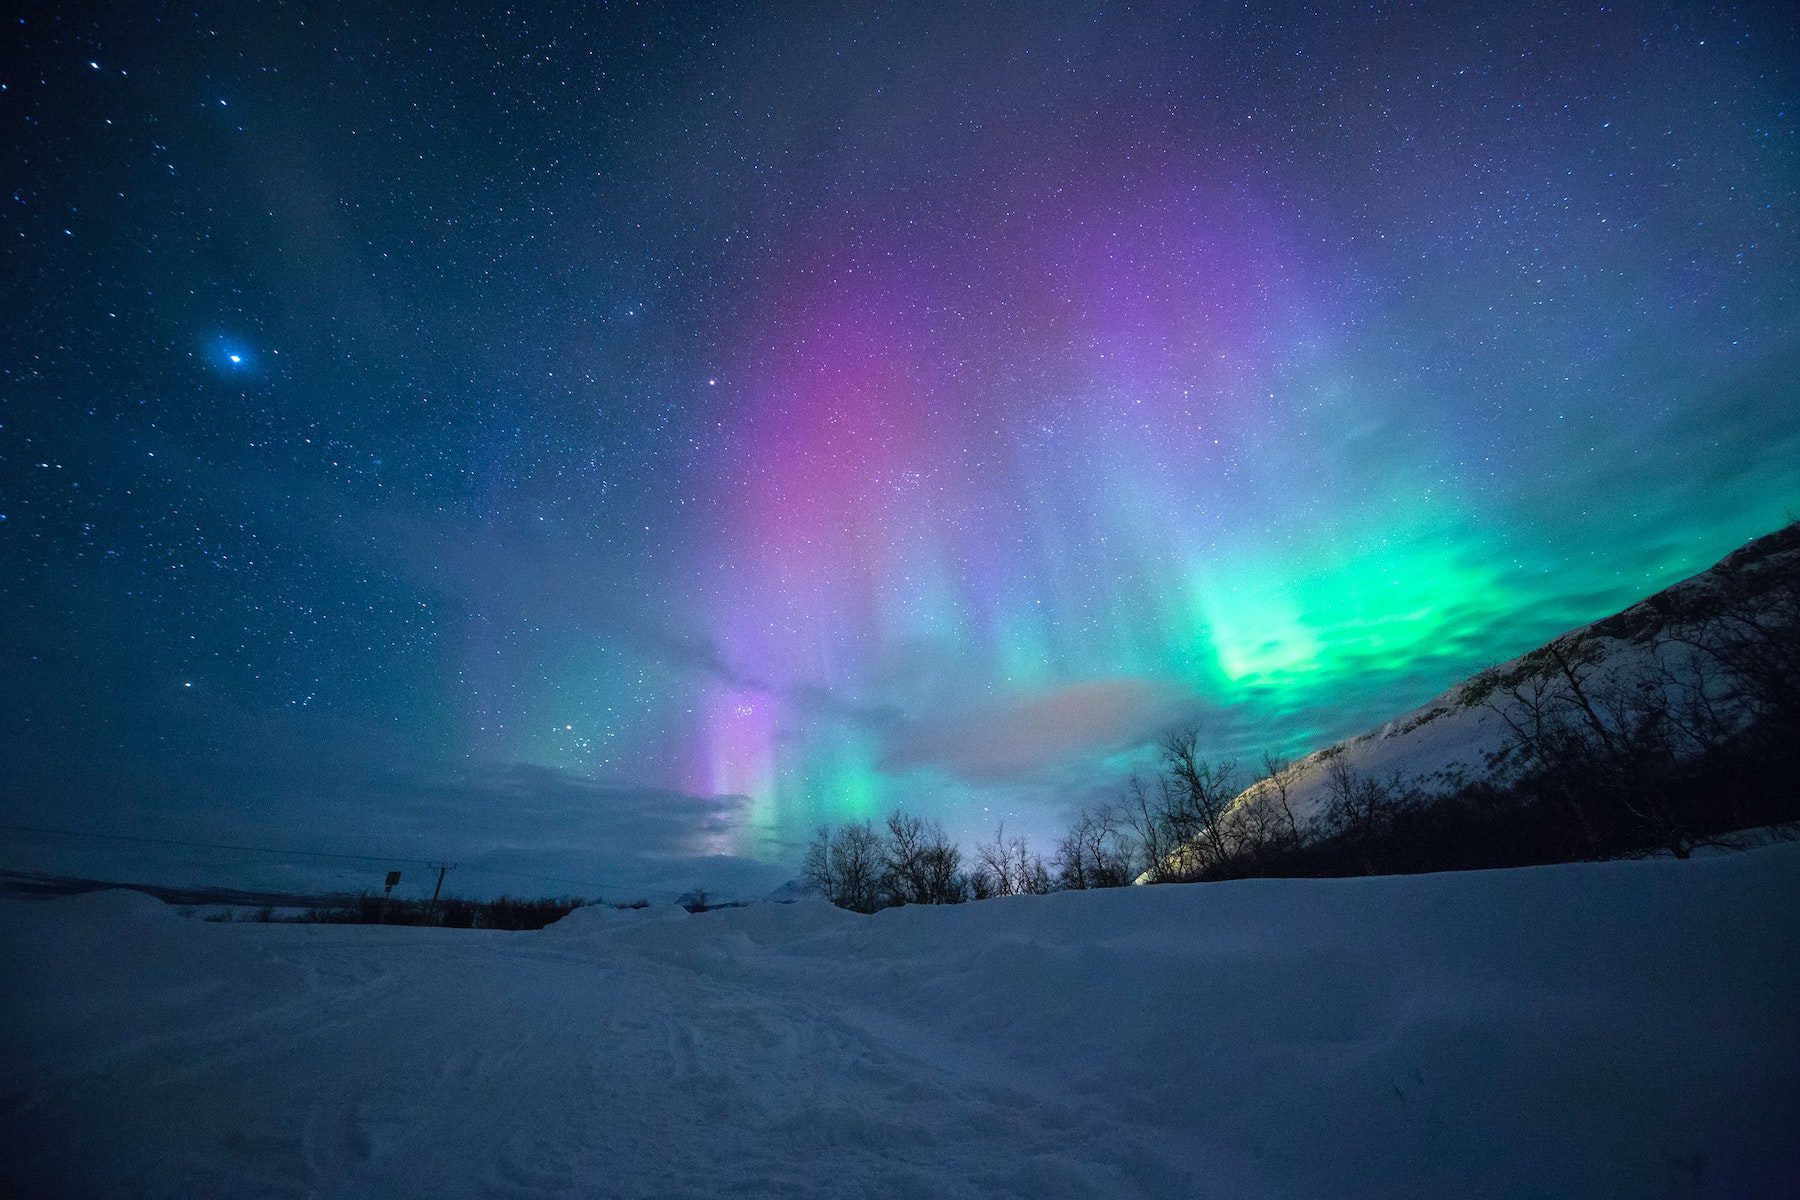 Aurora Borealis in Alaska, brilliant purple and teal lights against the starry sky with snow on the ground.